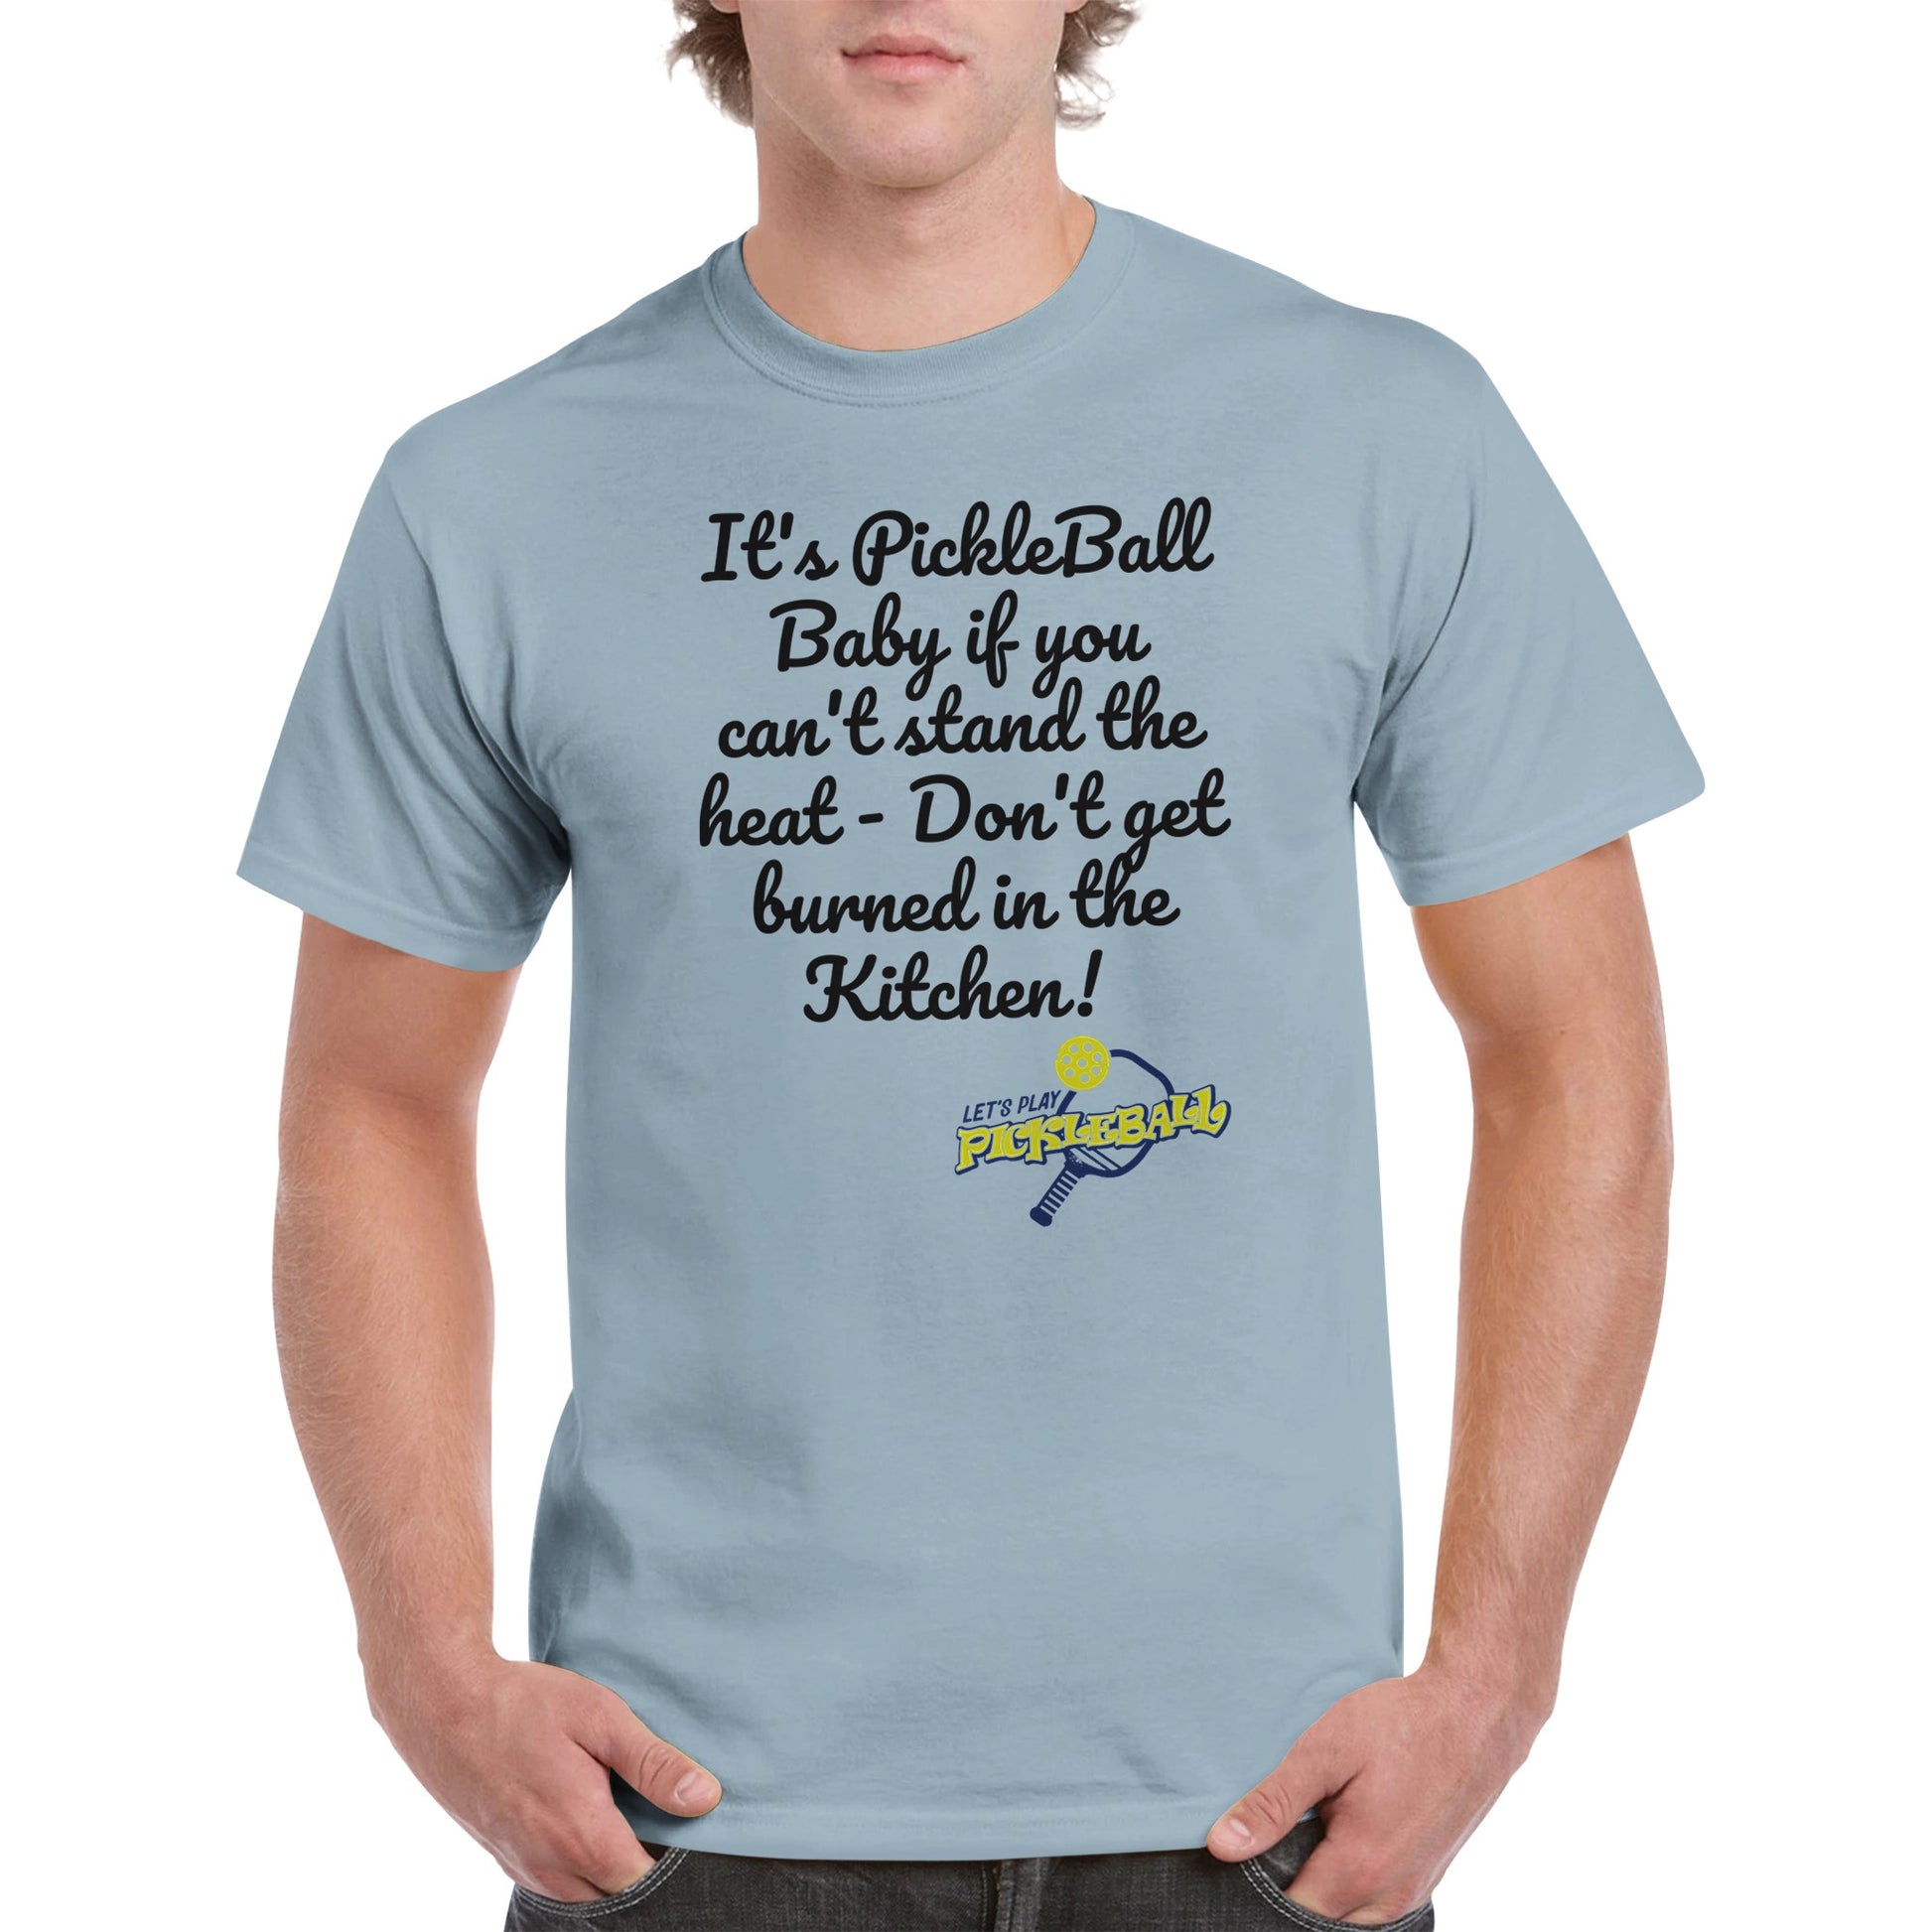 Light Blue comfortable Unisex Crewneck heavyweight cotton t-shirt with funny saying It’s PickleBall Baby if can’t stand the heat – Don’t get burned in the Kitchen!  and Let’s Play Pickleball logo on the front from WhatYa Say Apparel worn by blonde-haired male front view.